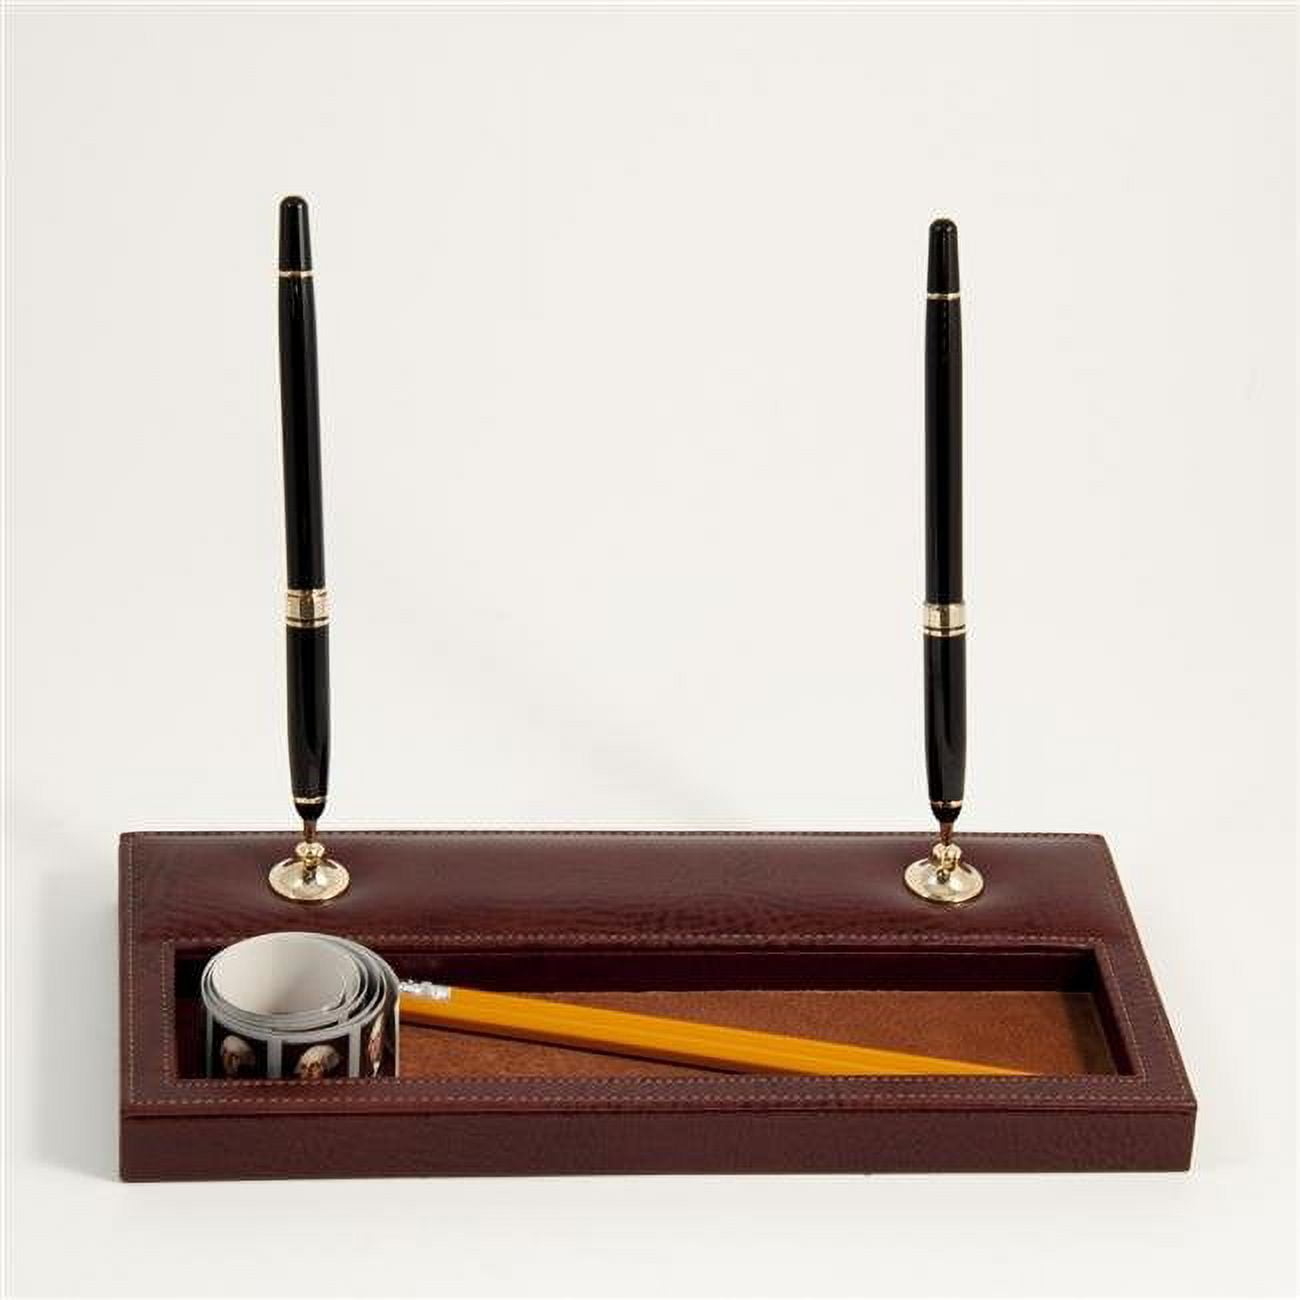 Bey-berk International D1118 Tan Leather Double Pen Stand With Gold Plated Accents